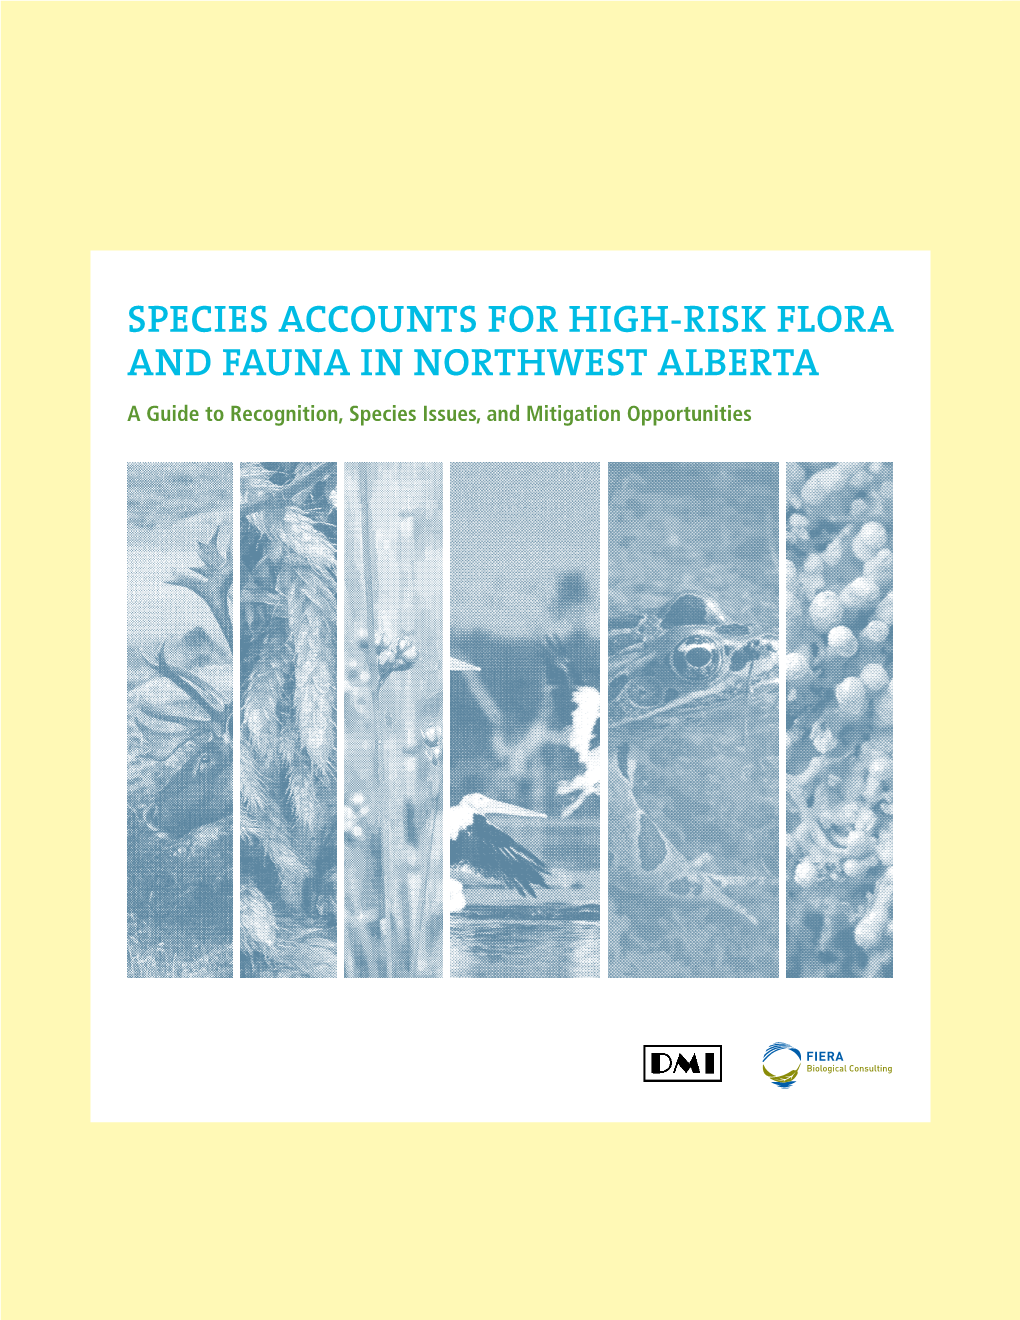 Species฀accounts฀for฀high-Risk฀flora฀ And฀fauna฀in฀northwest฀alberta a Guide to Recognition, Species Issues, and Mitigation Opportunities